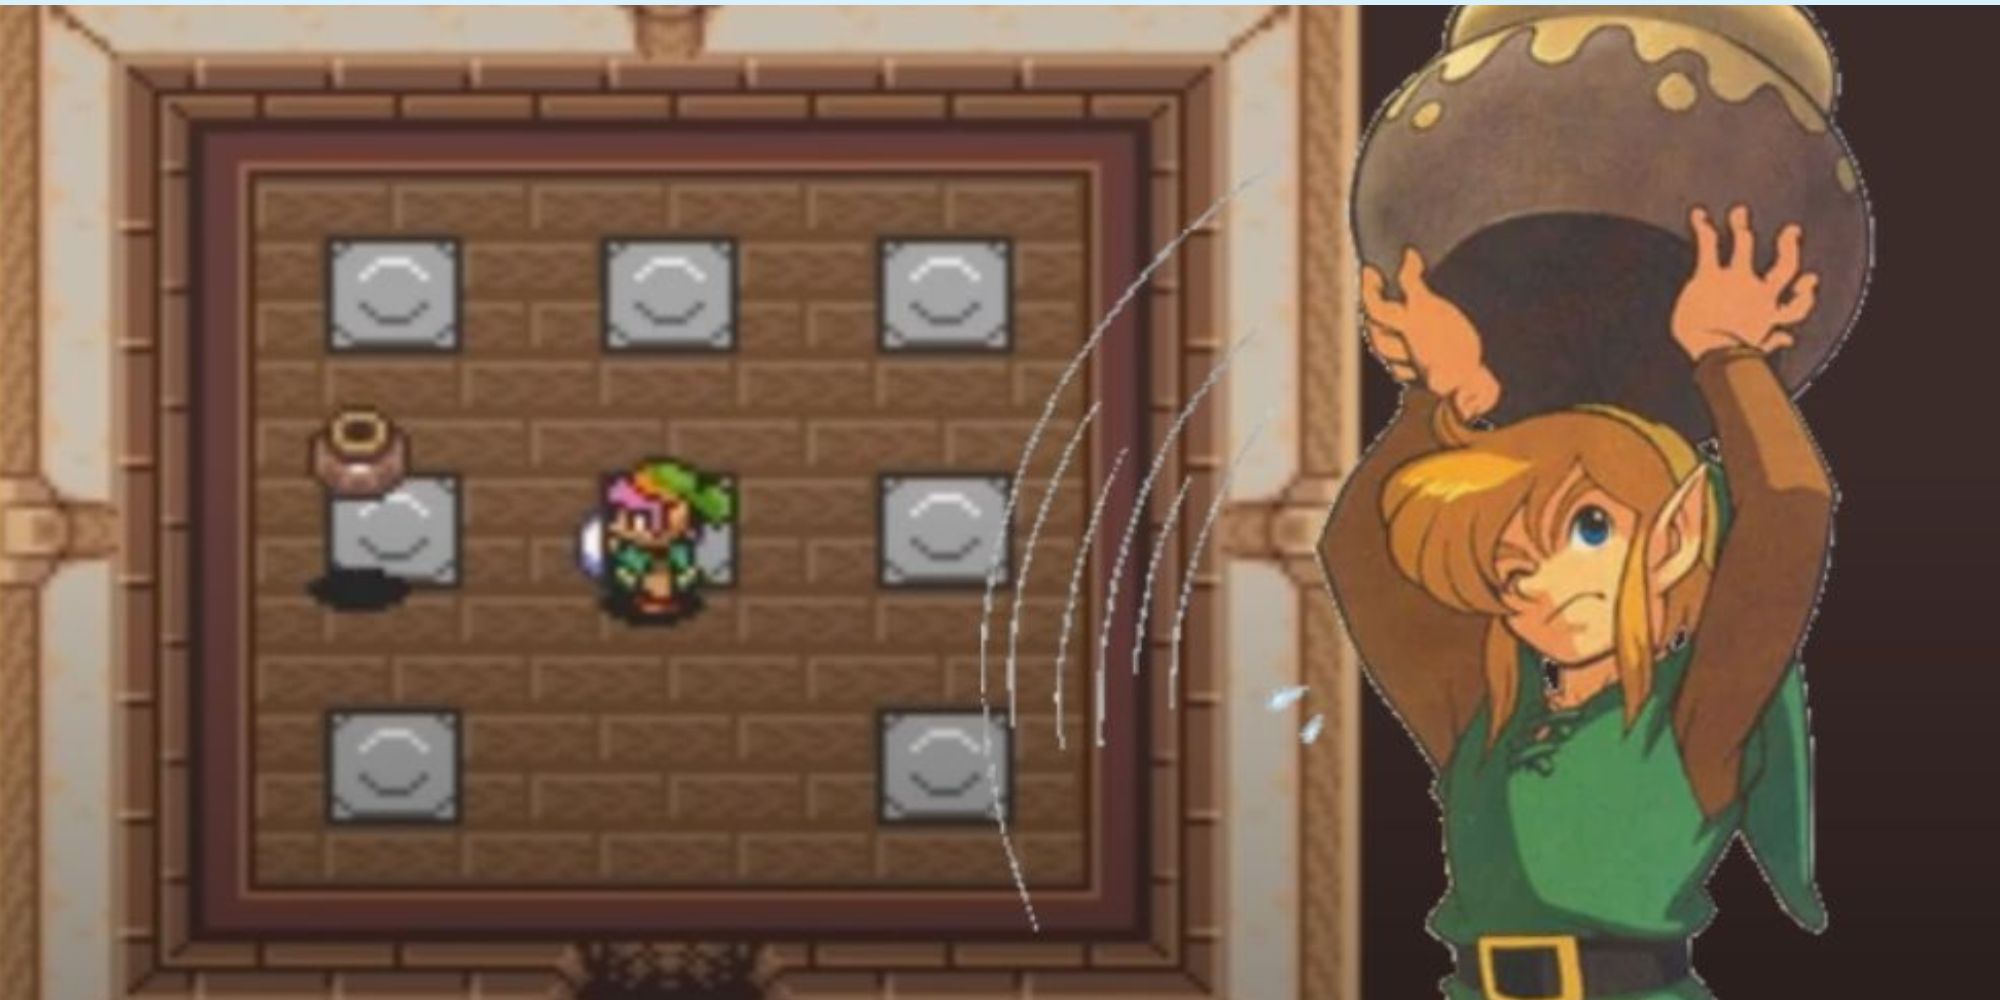 The Legend Of Zelda: A Link to the Past Has Been Decompiled To Run